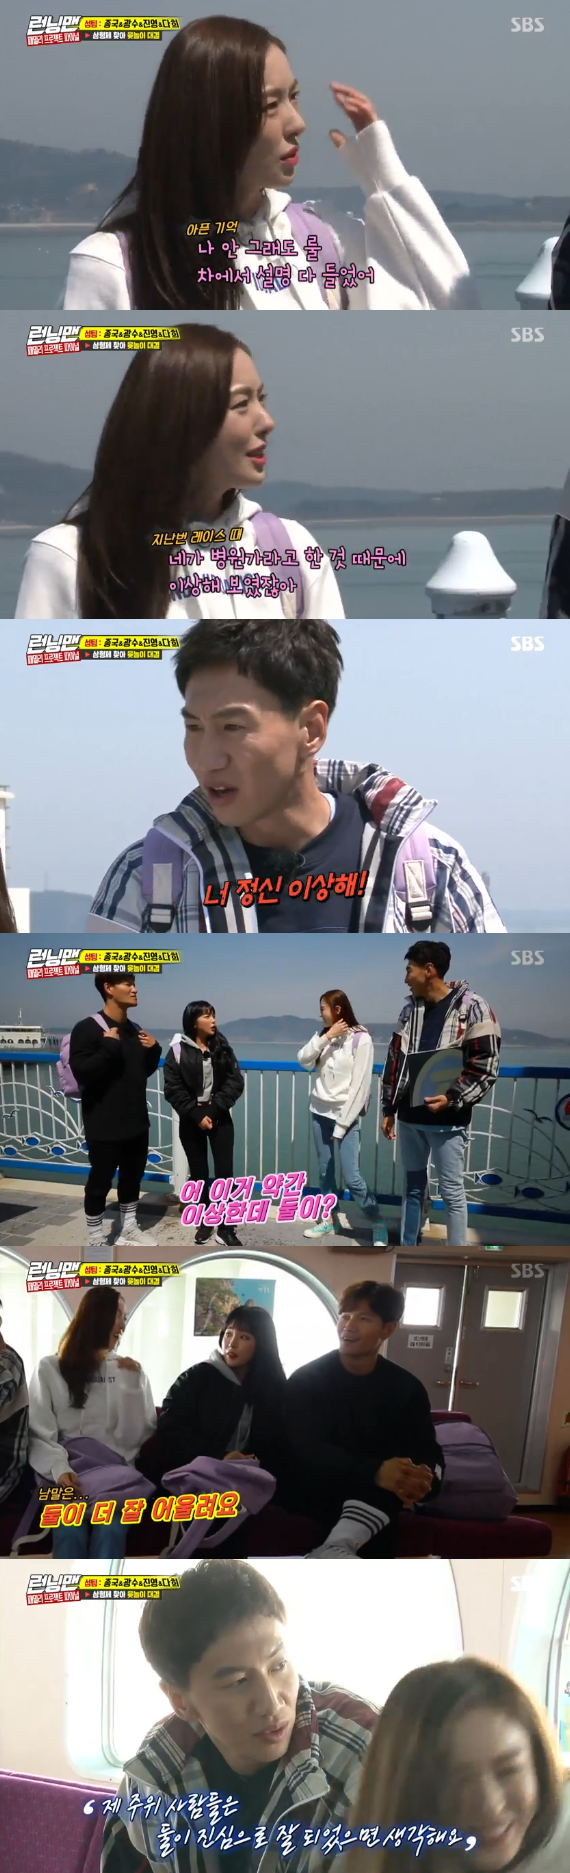 Lee Kwang-soo Lee Da-hee also received suspicions about the love line following the love line of Running Man Kim Jong-kook Hong Jin-young. SBS entertainment program Running Man, which was broadcast on the afternoon of the 6th, was a special feature of Family Global Package Project The final race of the 4th week of the Family Global Package Project was held.Yoo Jae-Suk, Kim Jong-kook and Ji Suk-jin were divided into three teams as team leaders; each team had to go to a randomly set place and perform the mission.Yoo Jae-Suk picked Hong Kong, Kim Jong-kook was the island, and Ji Suk-jin picked inland.Hong Jin-young, who had a love line with Kim Jong-kook and a questionable love line, surprised everyone by winning the Kim Jong-kook team in a random team selection.But Kim Jong-kook and Hong Jin-young were not the only Kim Jong-kook teams.Lee Da-hee, who did not attend the opening due to the drama shooting schedule, was also assigned to the team after Lee Kwang-soo entered the Kim Jong-kook team.The crew proposal and the other team proposal were decided through a lottery.The commission of the Yoo Jae-Suk team will stand and experience unconditionally until the queue number 100 is filled in Hong Kong. The Kim Jong-kook team mission will find a real three brothers in Shinshimodo, Incheon, win the Mona road, and Ji Suk-jin team will pick up a highway and stop at all resting places to eat the best food in Hadong. It was a straw line ride.Lee Da-hee joined late with Kim Jong-kook, Hong Jin-young and Lee Kwang-soo arriving at the marina to board the ship.Lee Da-hee, who had been pointed out by other members in the past broadcasts because he did not understand the game properly, was attacked with intensive questions, saying, Did you know the rules of the game?He was confident, saying, I knew everything. Lee Kwang-soo especially poured intensive fire on Lee Da-hee.He laughed when Lee Da-hee said, You seemed to be in a strange mind because of what you told me to go to the hospital.Kim Jong-kook and Hong Jin-young, who watched this, saw two people who were tit-for-tat as soon as they arrived.It seems like a couple fighting together, the production team said, also helping: The clothes are like a couple, Lee Kwang-soo hit back, My brother is more like a couple.